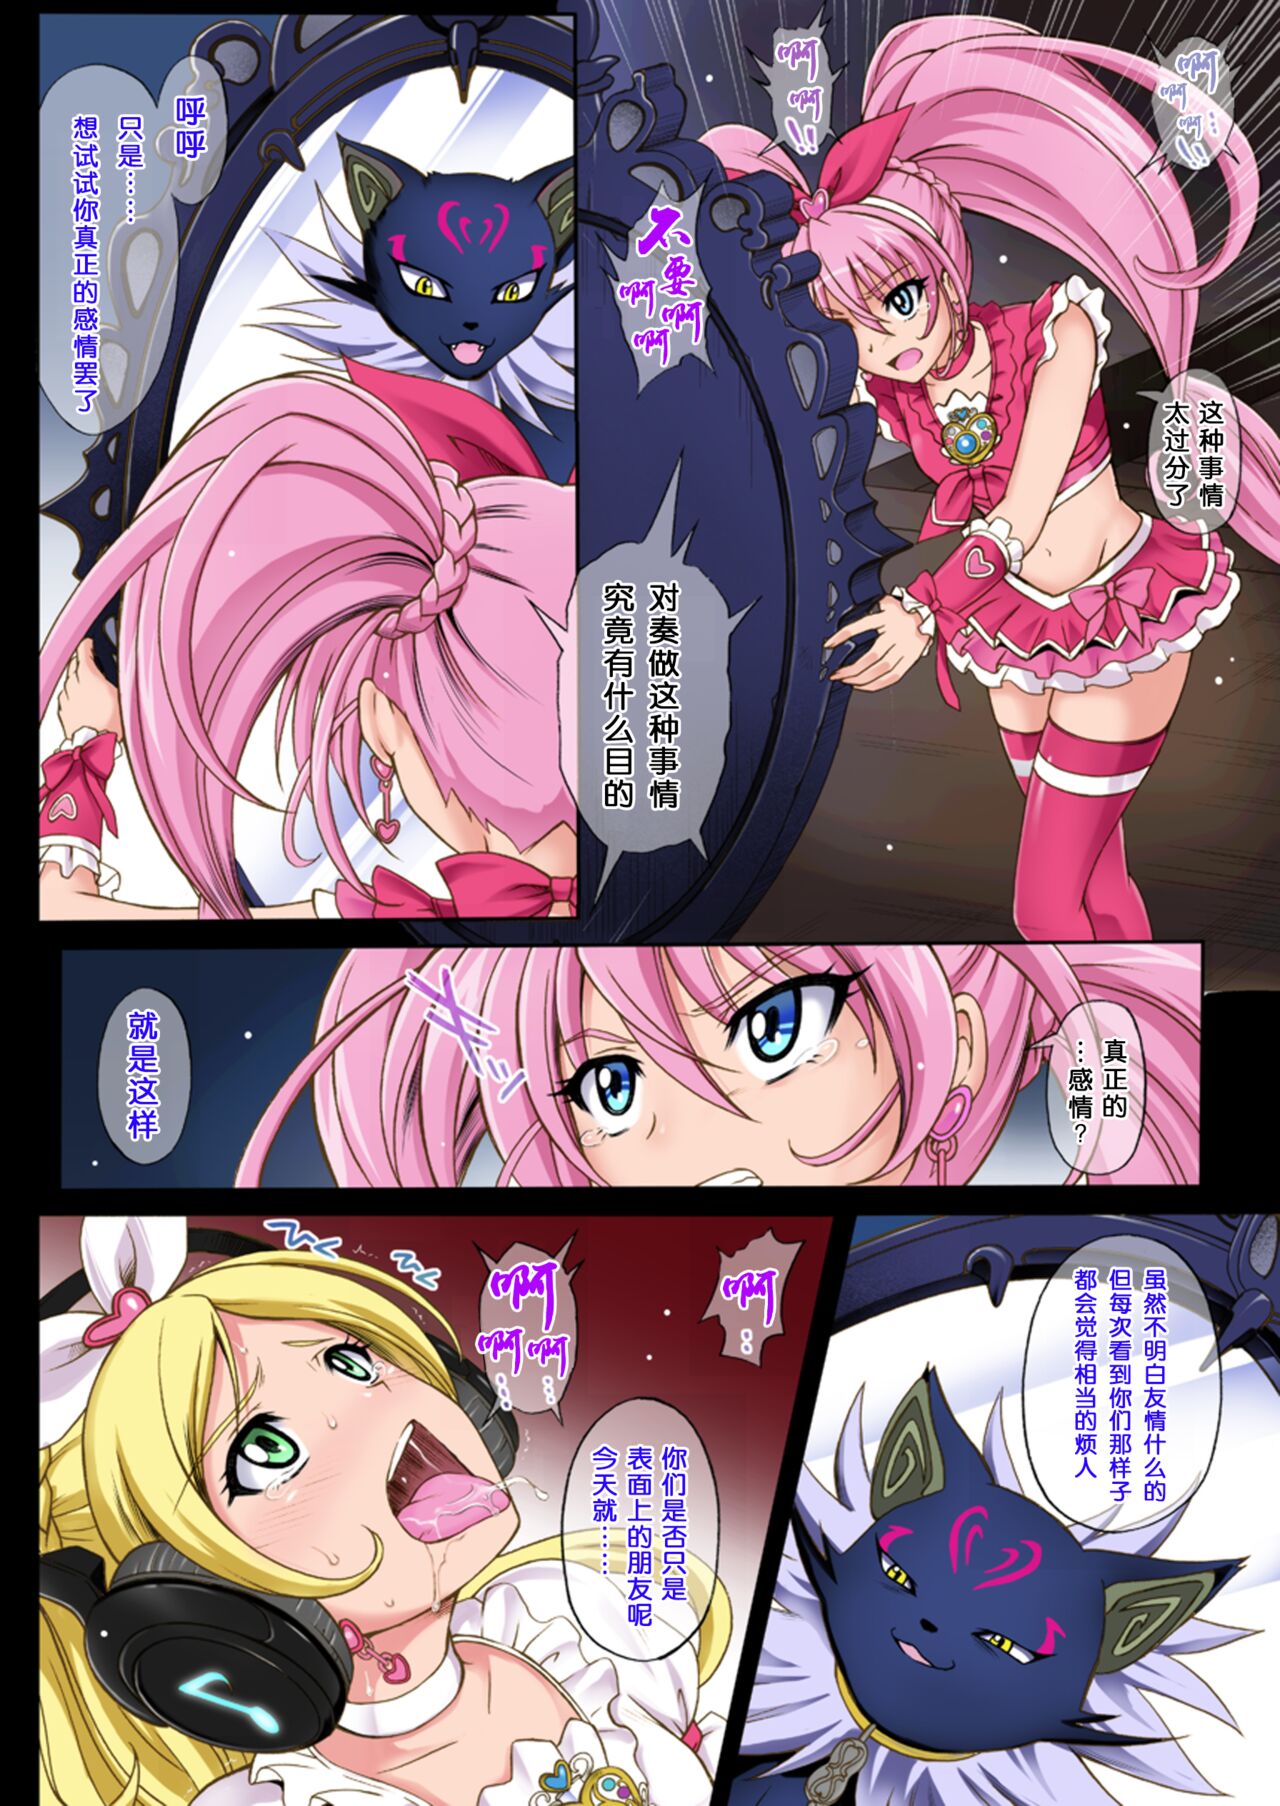 [Cyclone (Izumi, Reizei)] Cyclone no Full Color Pack1 "Sui-Sui" (Suite Precure) [Chinese] [个人重嵌&去条码] [Digital] [サイクロン (和泉、冷泉)] サイクロンのフルカラーパック1「Sui-Sui」 (スイートプリキュア♪) [中国翻訳] [無修正] [DL版]